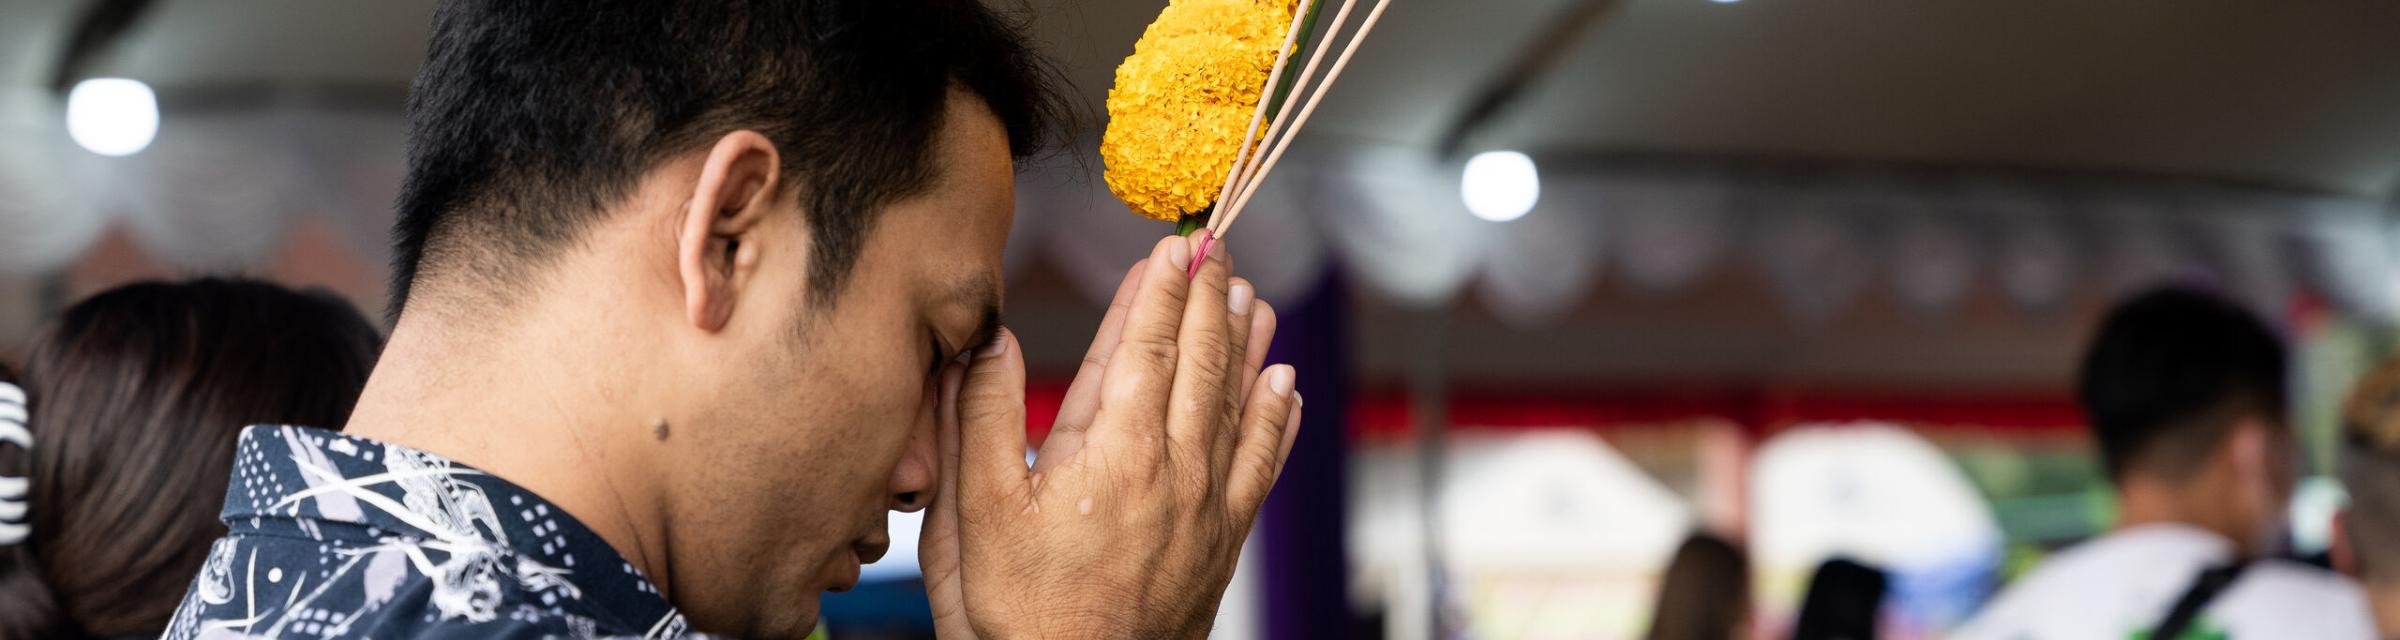 Man holding yellow flowers prays at a Buddhist shrine in Thailand. Photo by Rebecca Rempel.